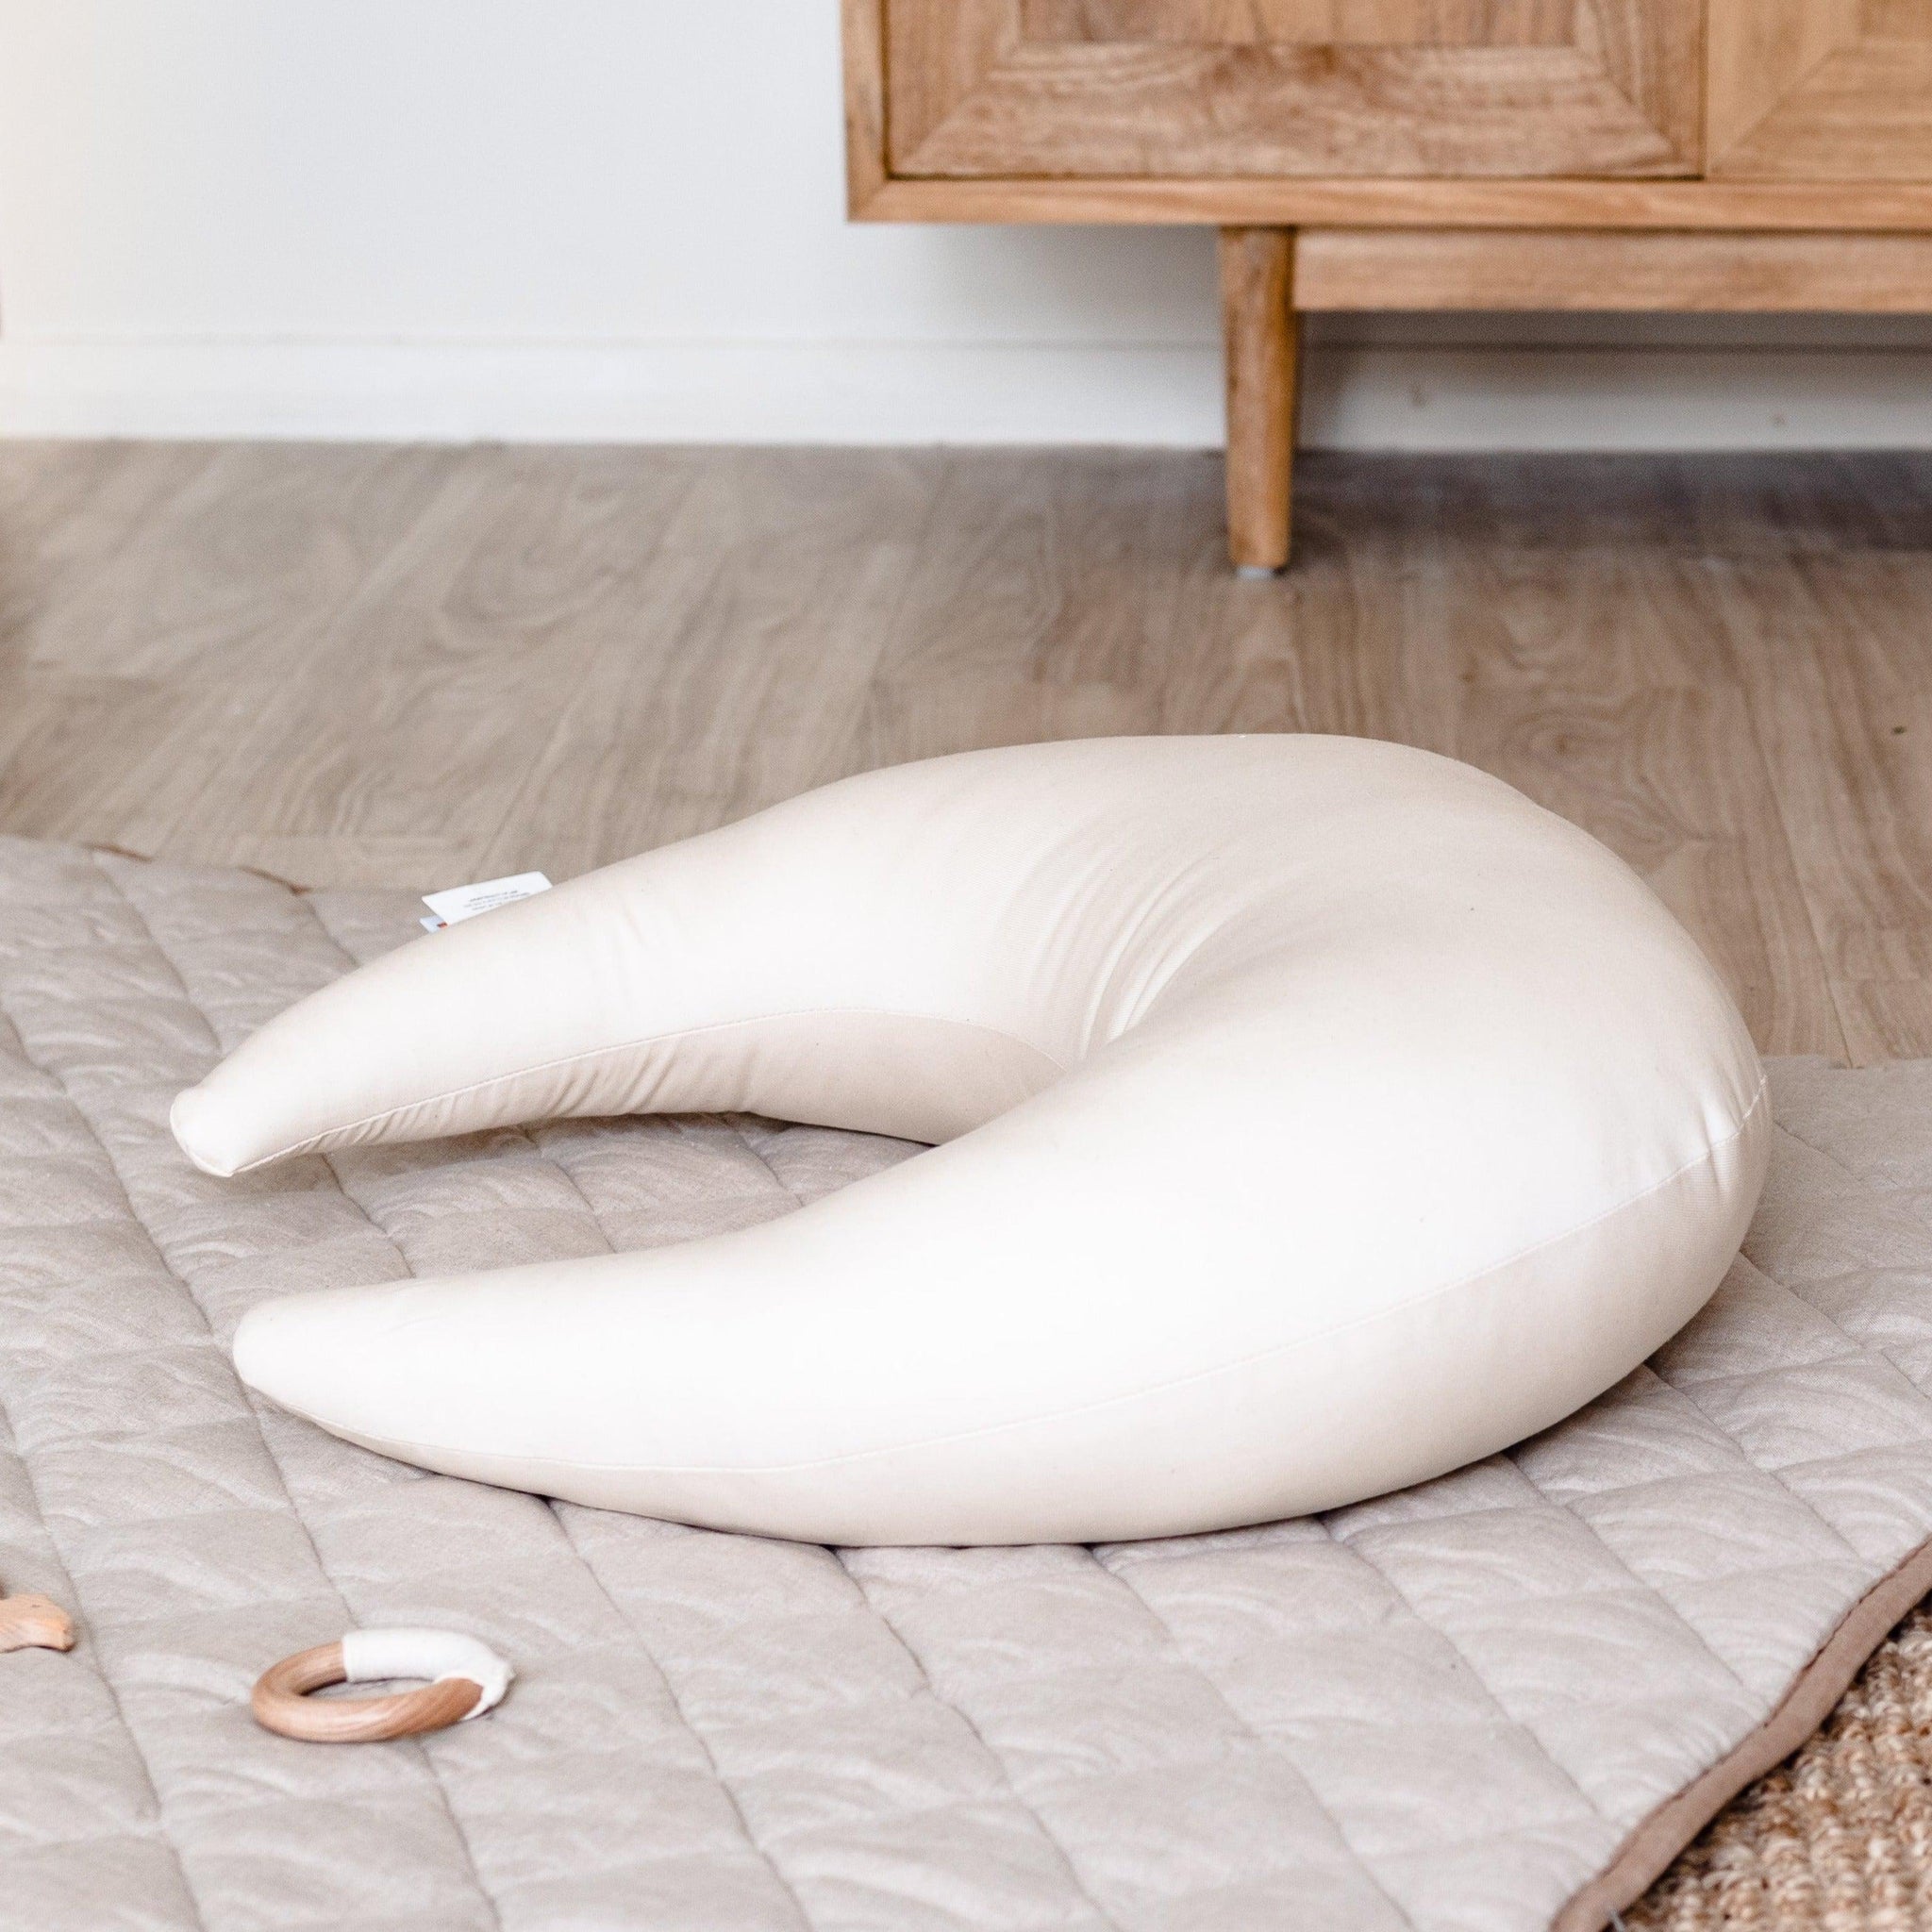 A PREORDER Snuggle Me organic feeding pillow on a rug next to a wooden toy.